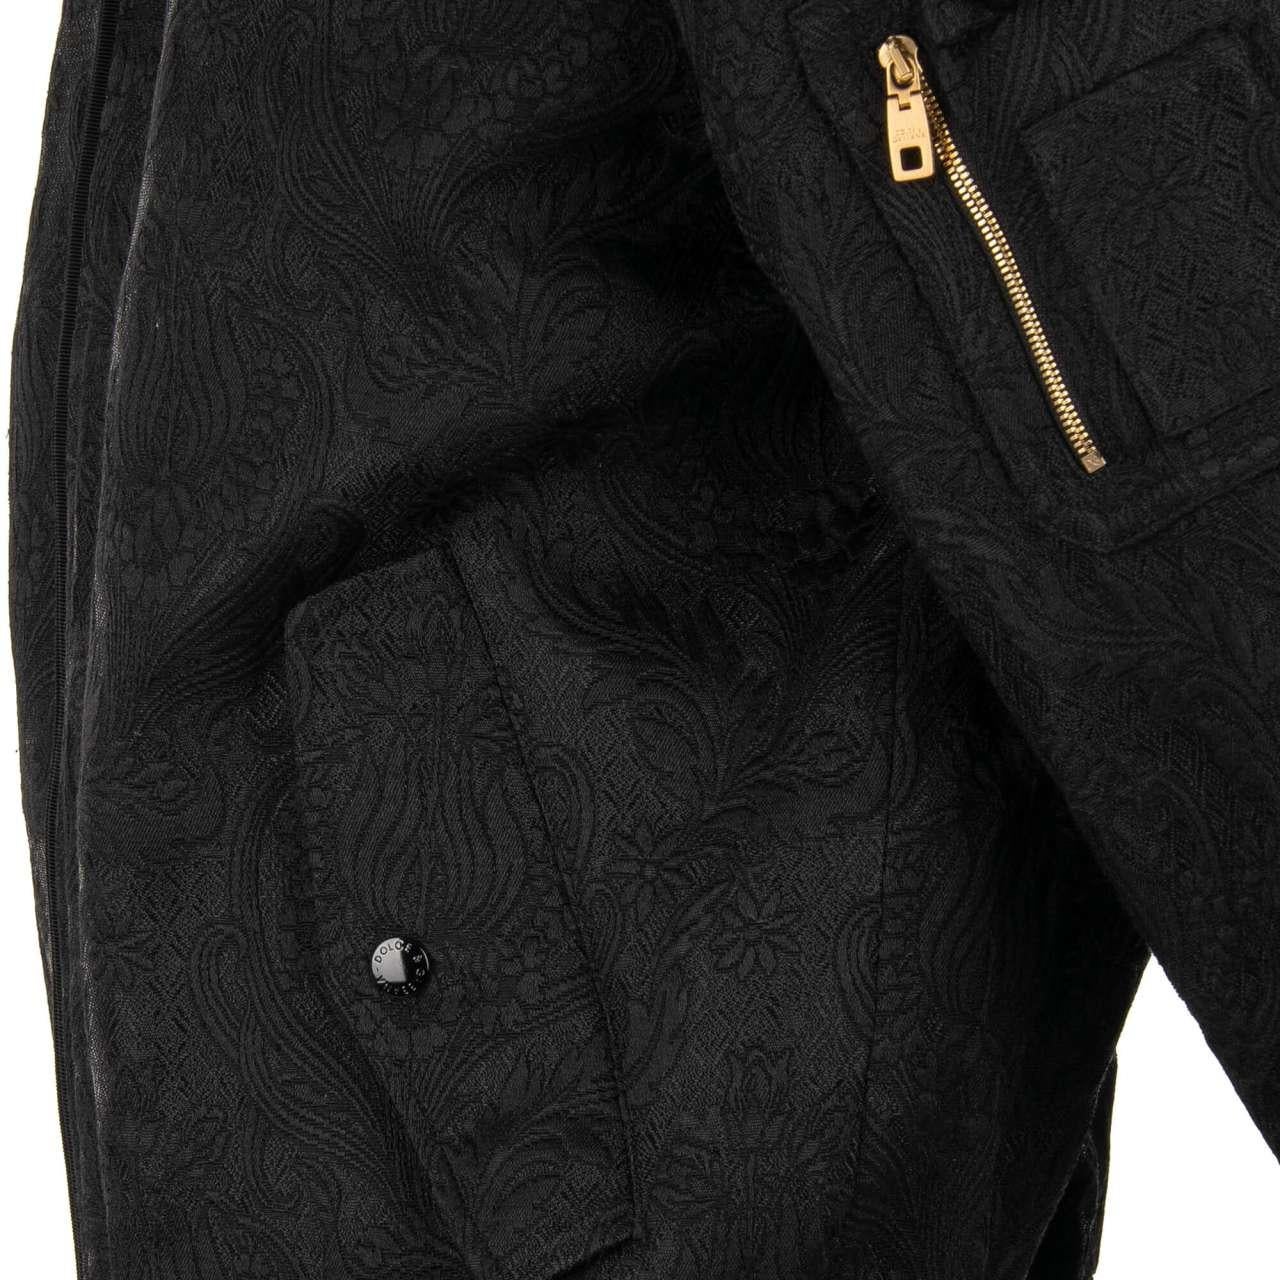 Dolce & Gabbana Brocade Bomber Jacket with Zip Closure and Pockets Black 56 For Sale 4